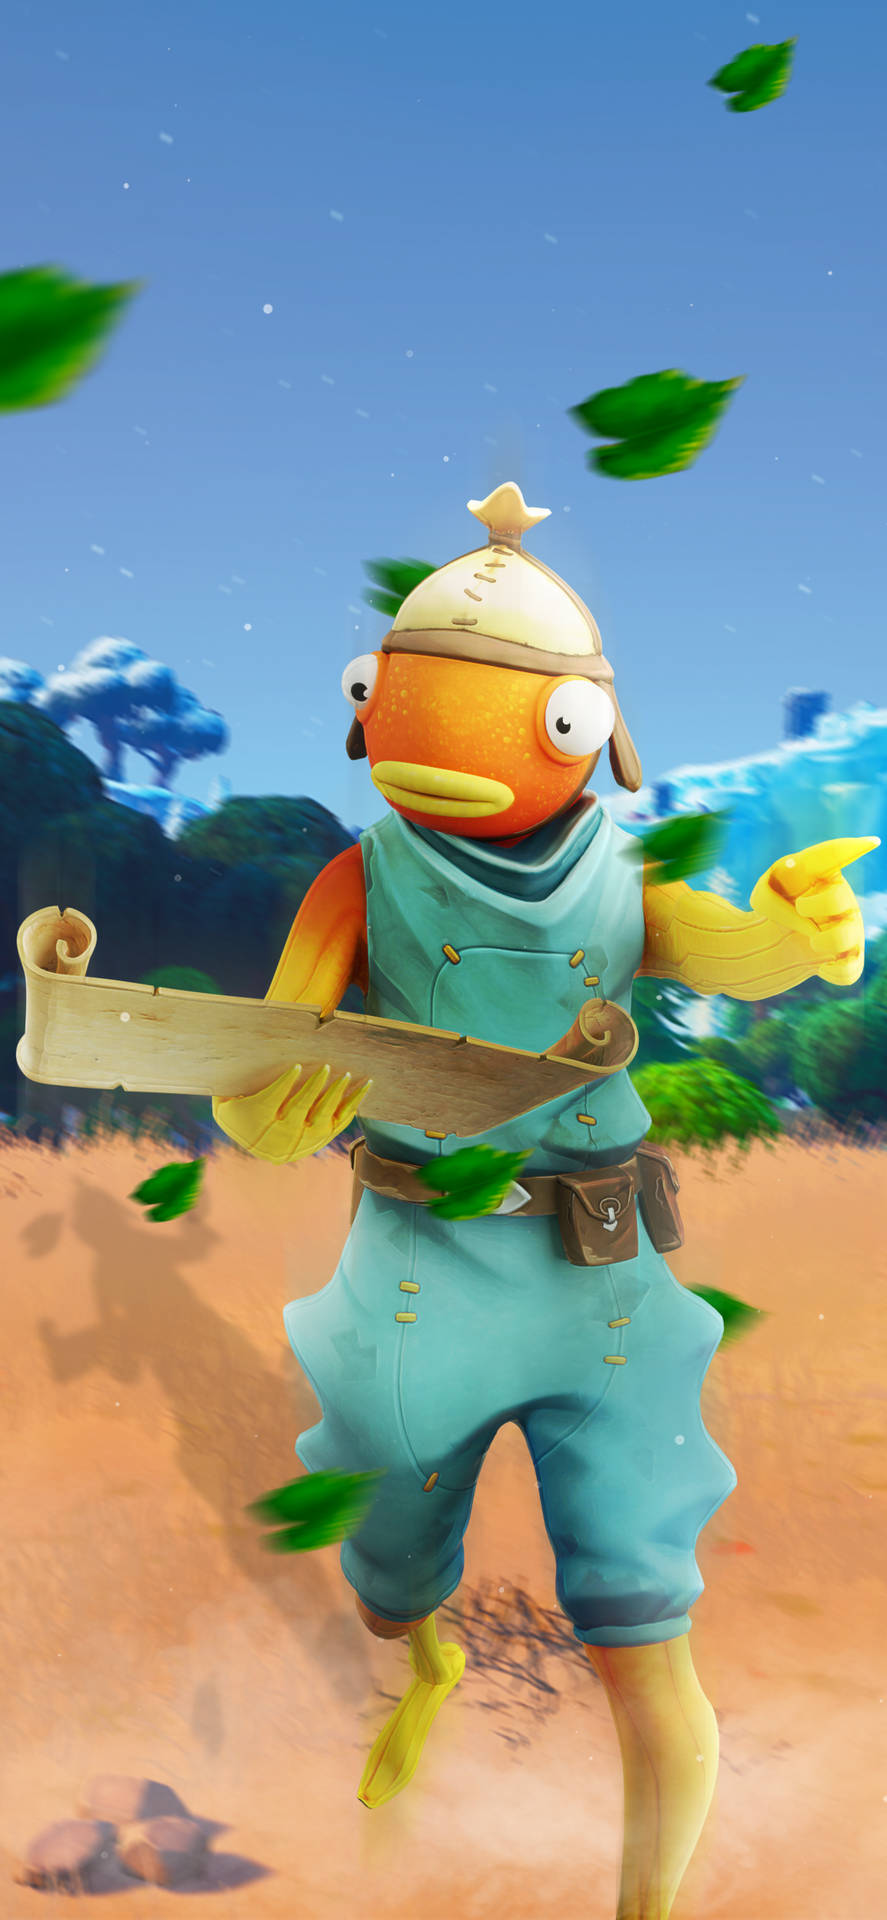 Fortnite Adventure With Fishstick - Dive Into The Battle Royale Excitement Background